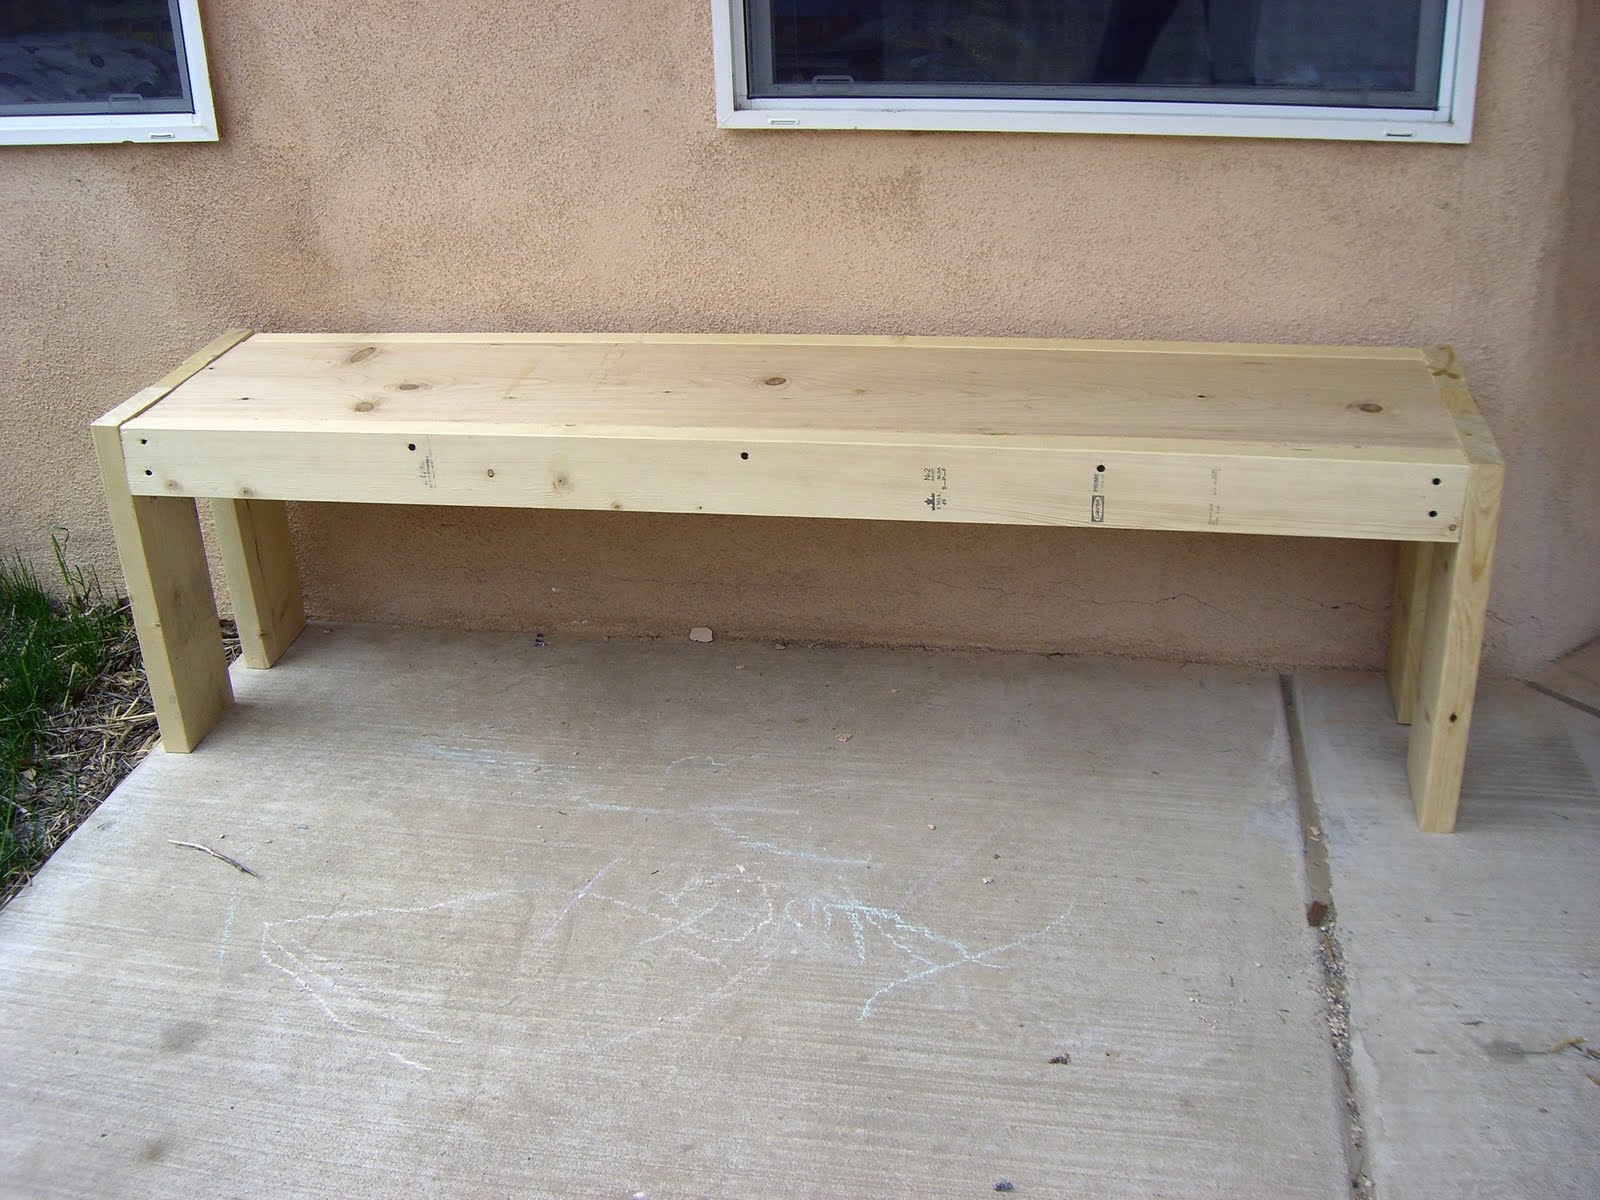  download how to build a outdoor wood bench plans with quality plans